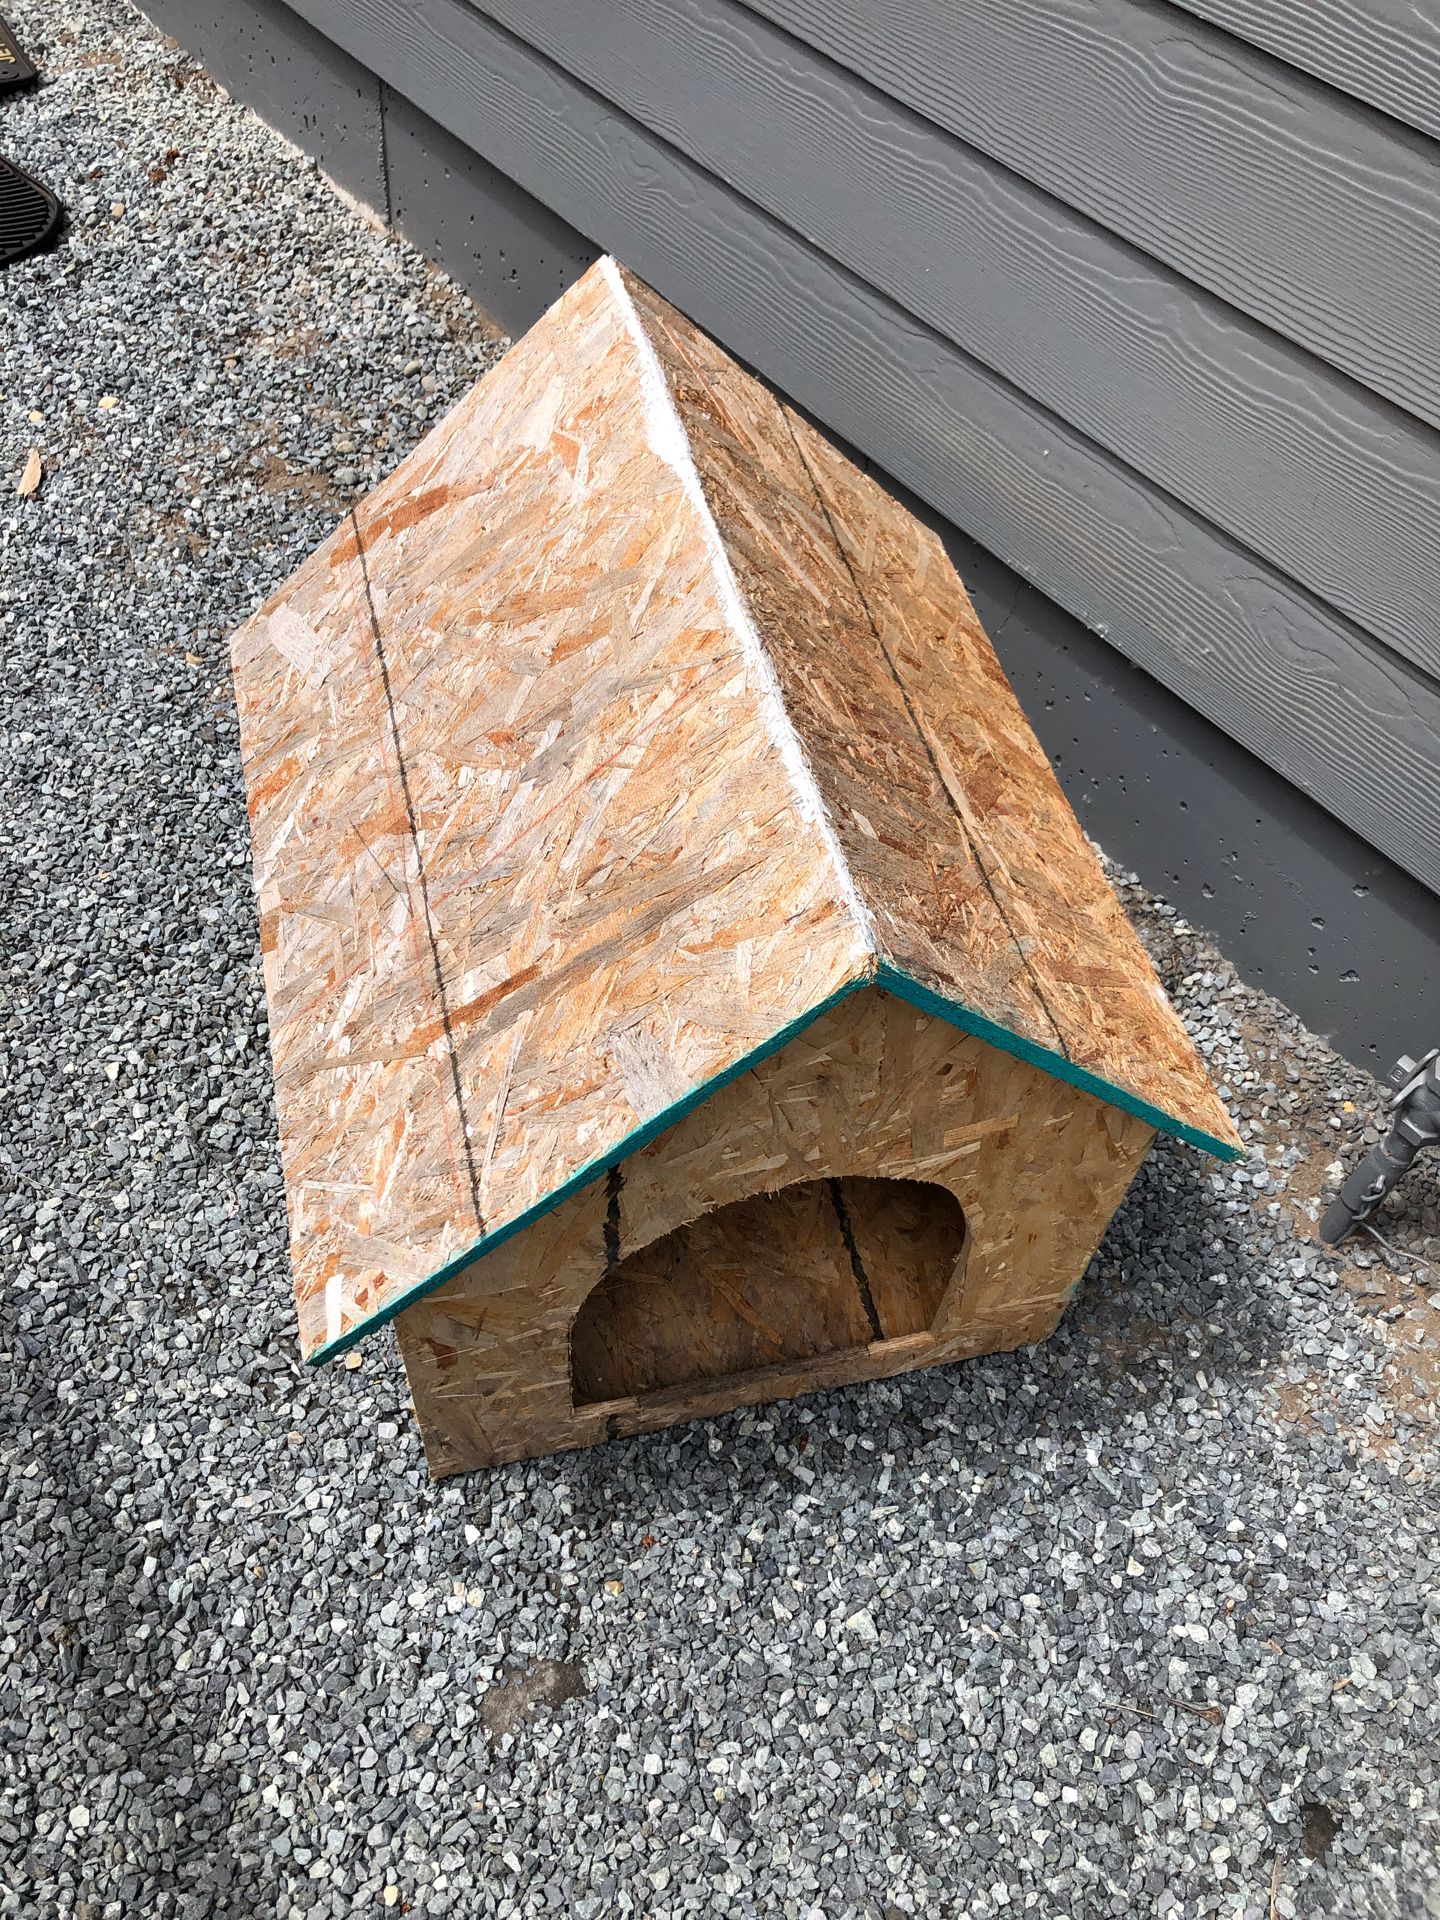 Wood cat house or good for little dog.